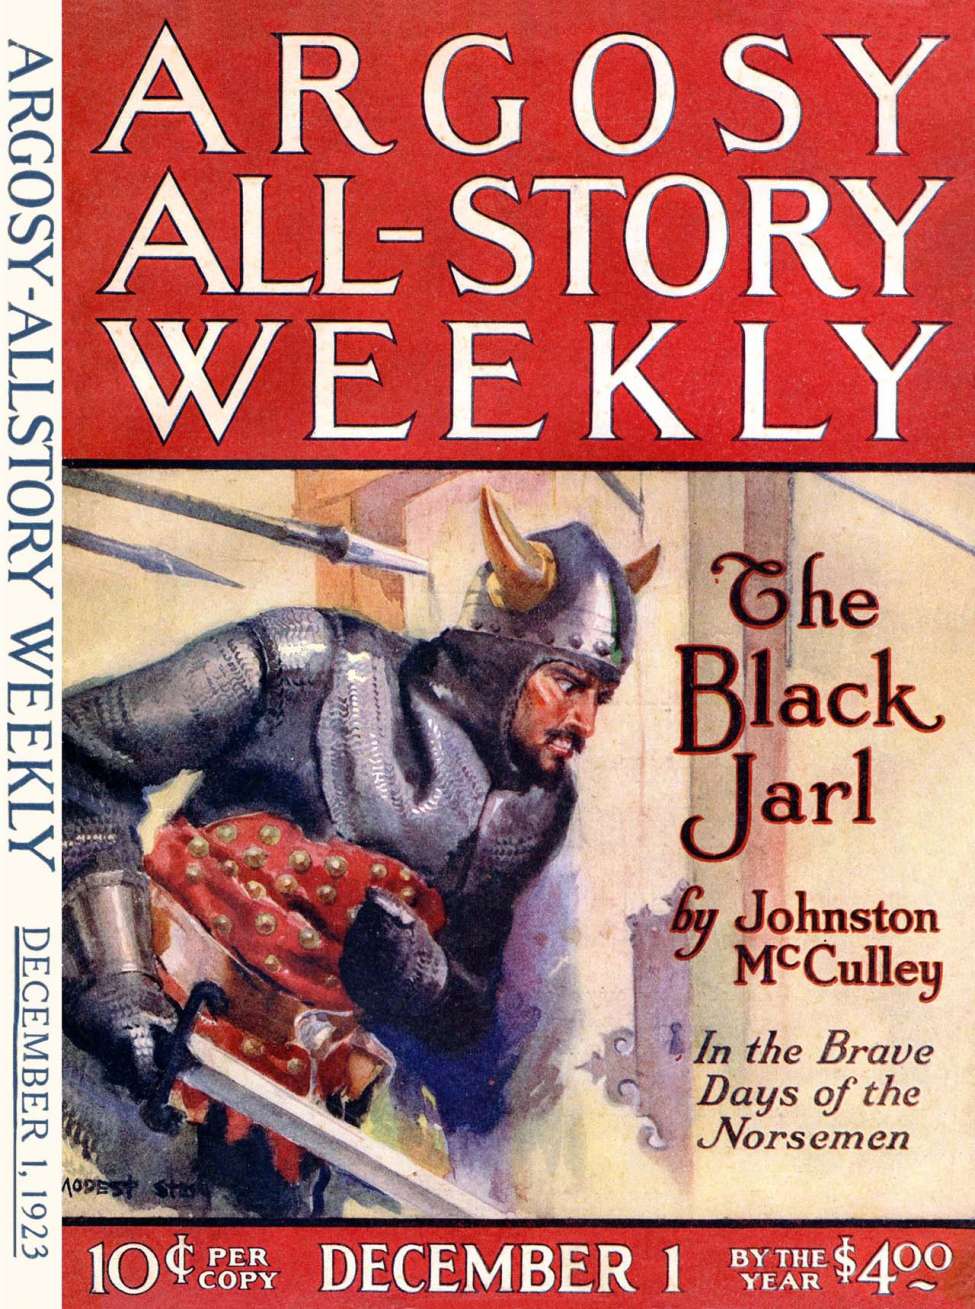 Book Cover For Argosy All-Story Weekly v156 2